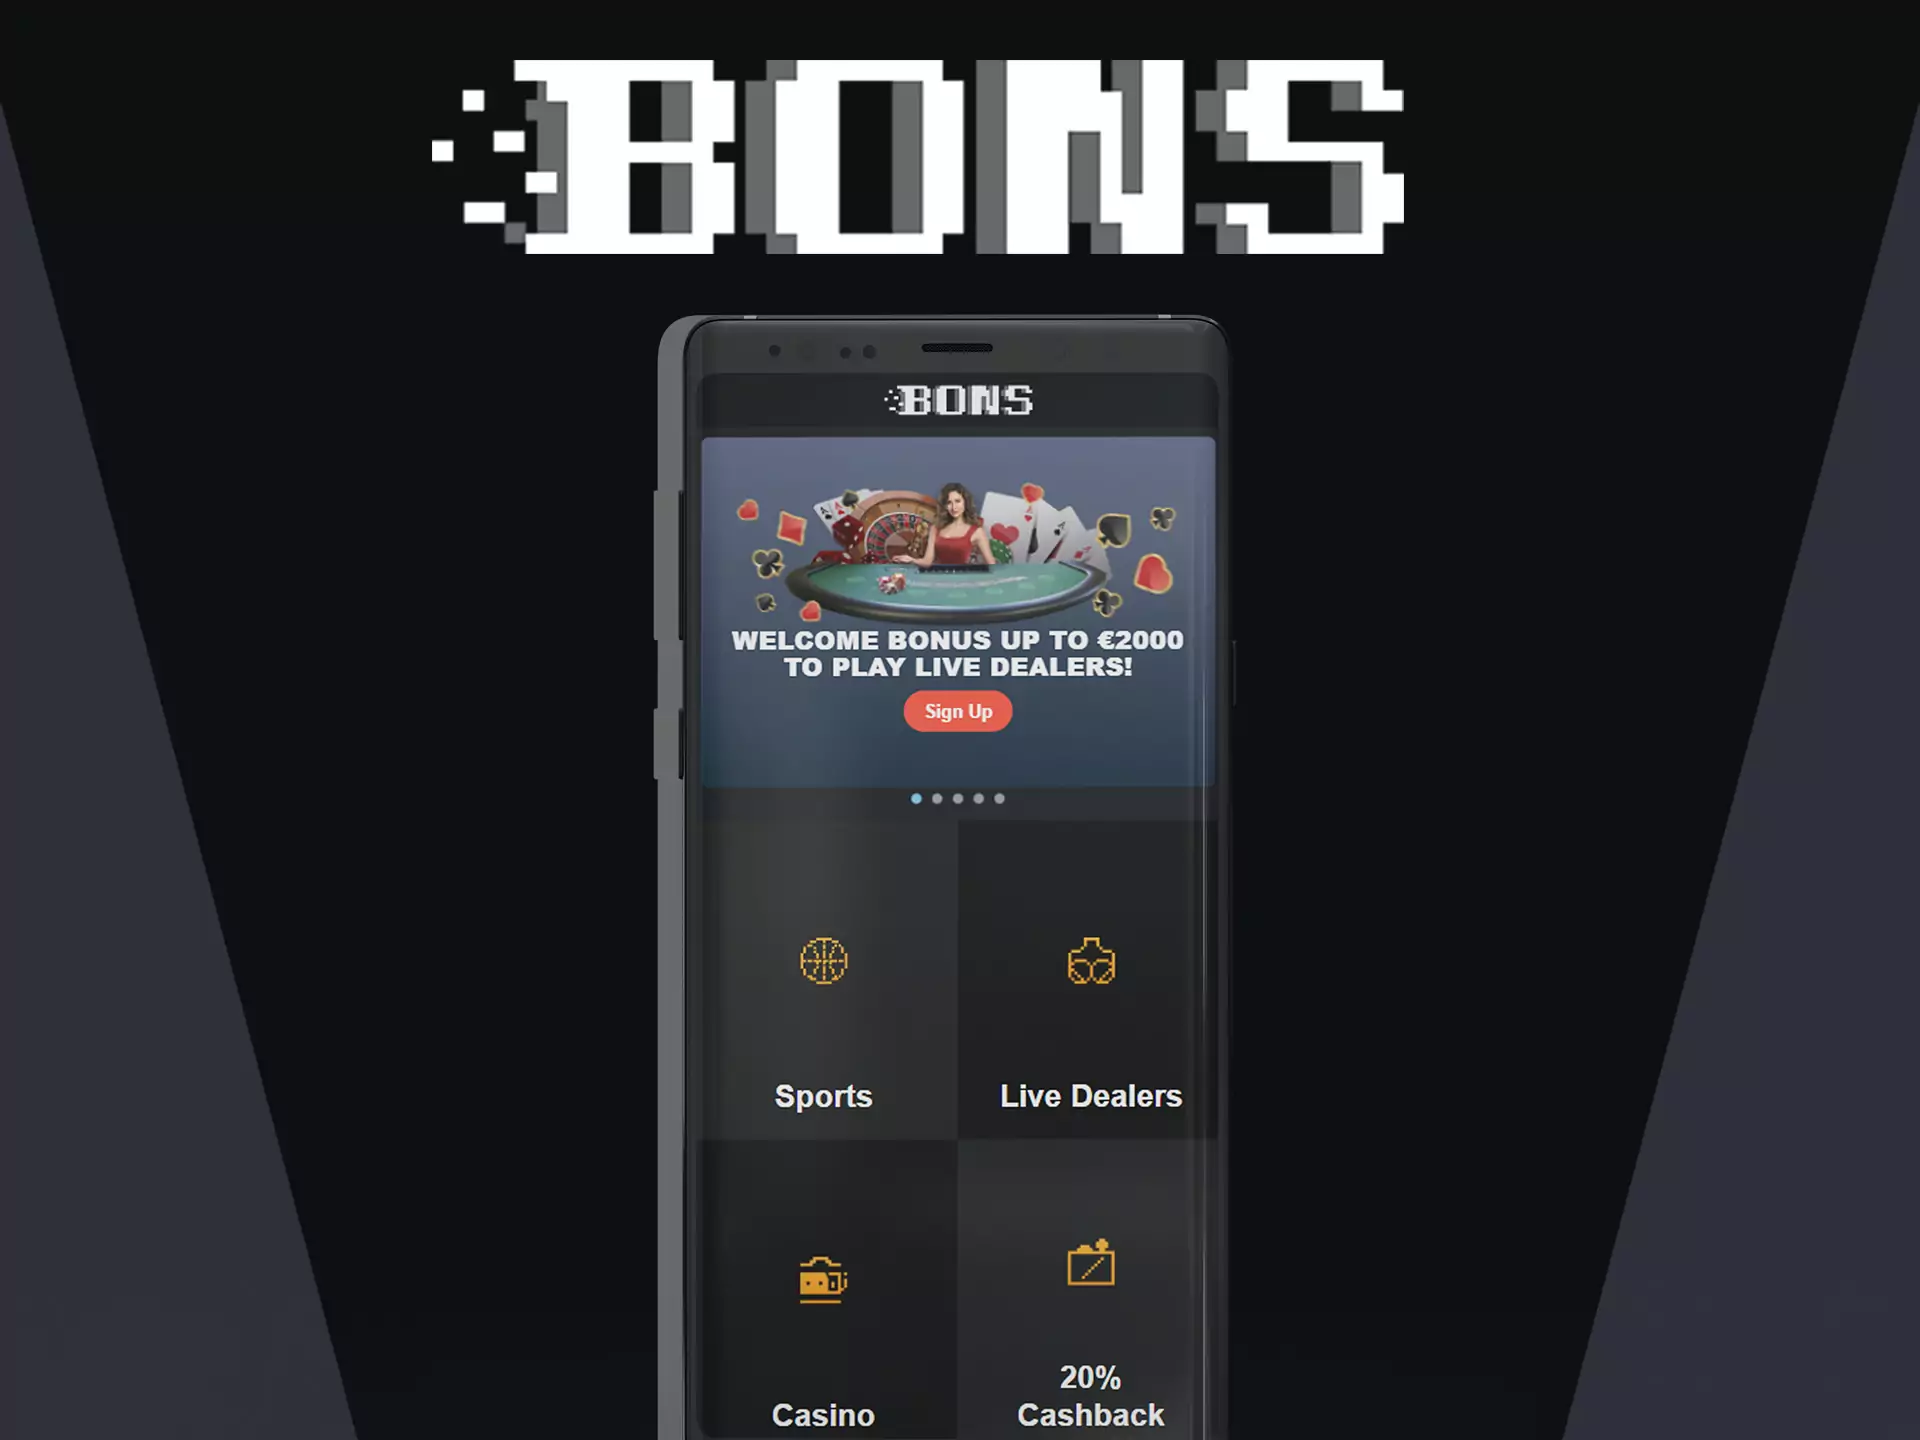 The Bons app is of high quality among competitors.